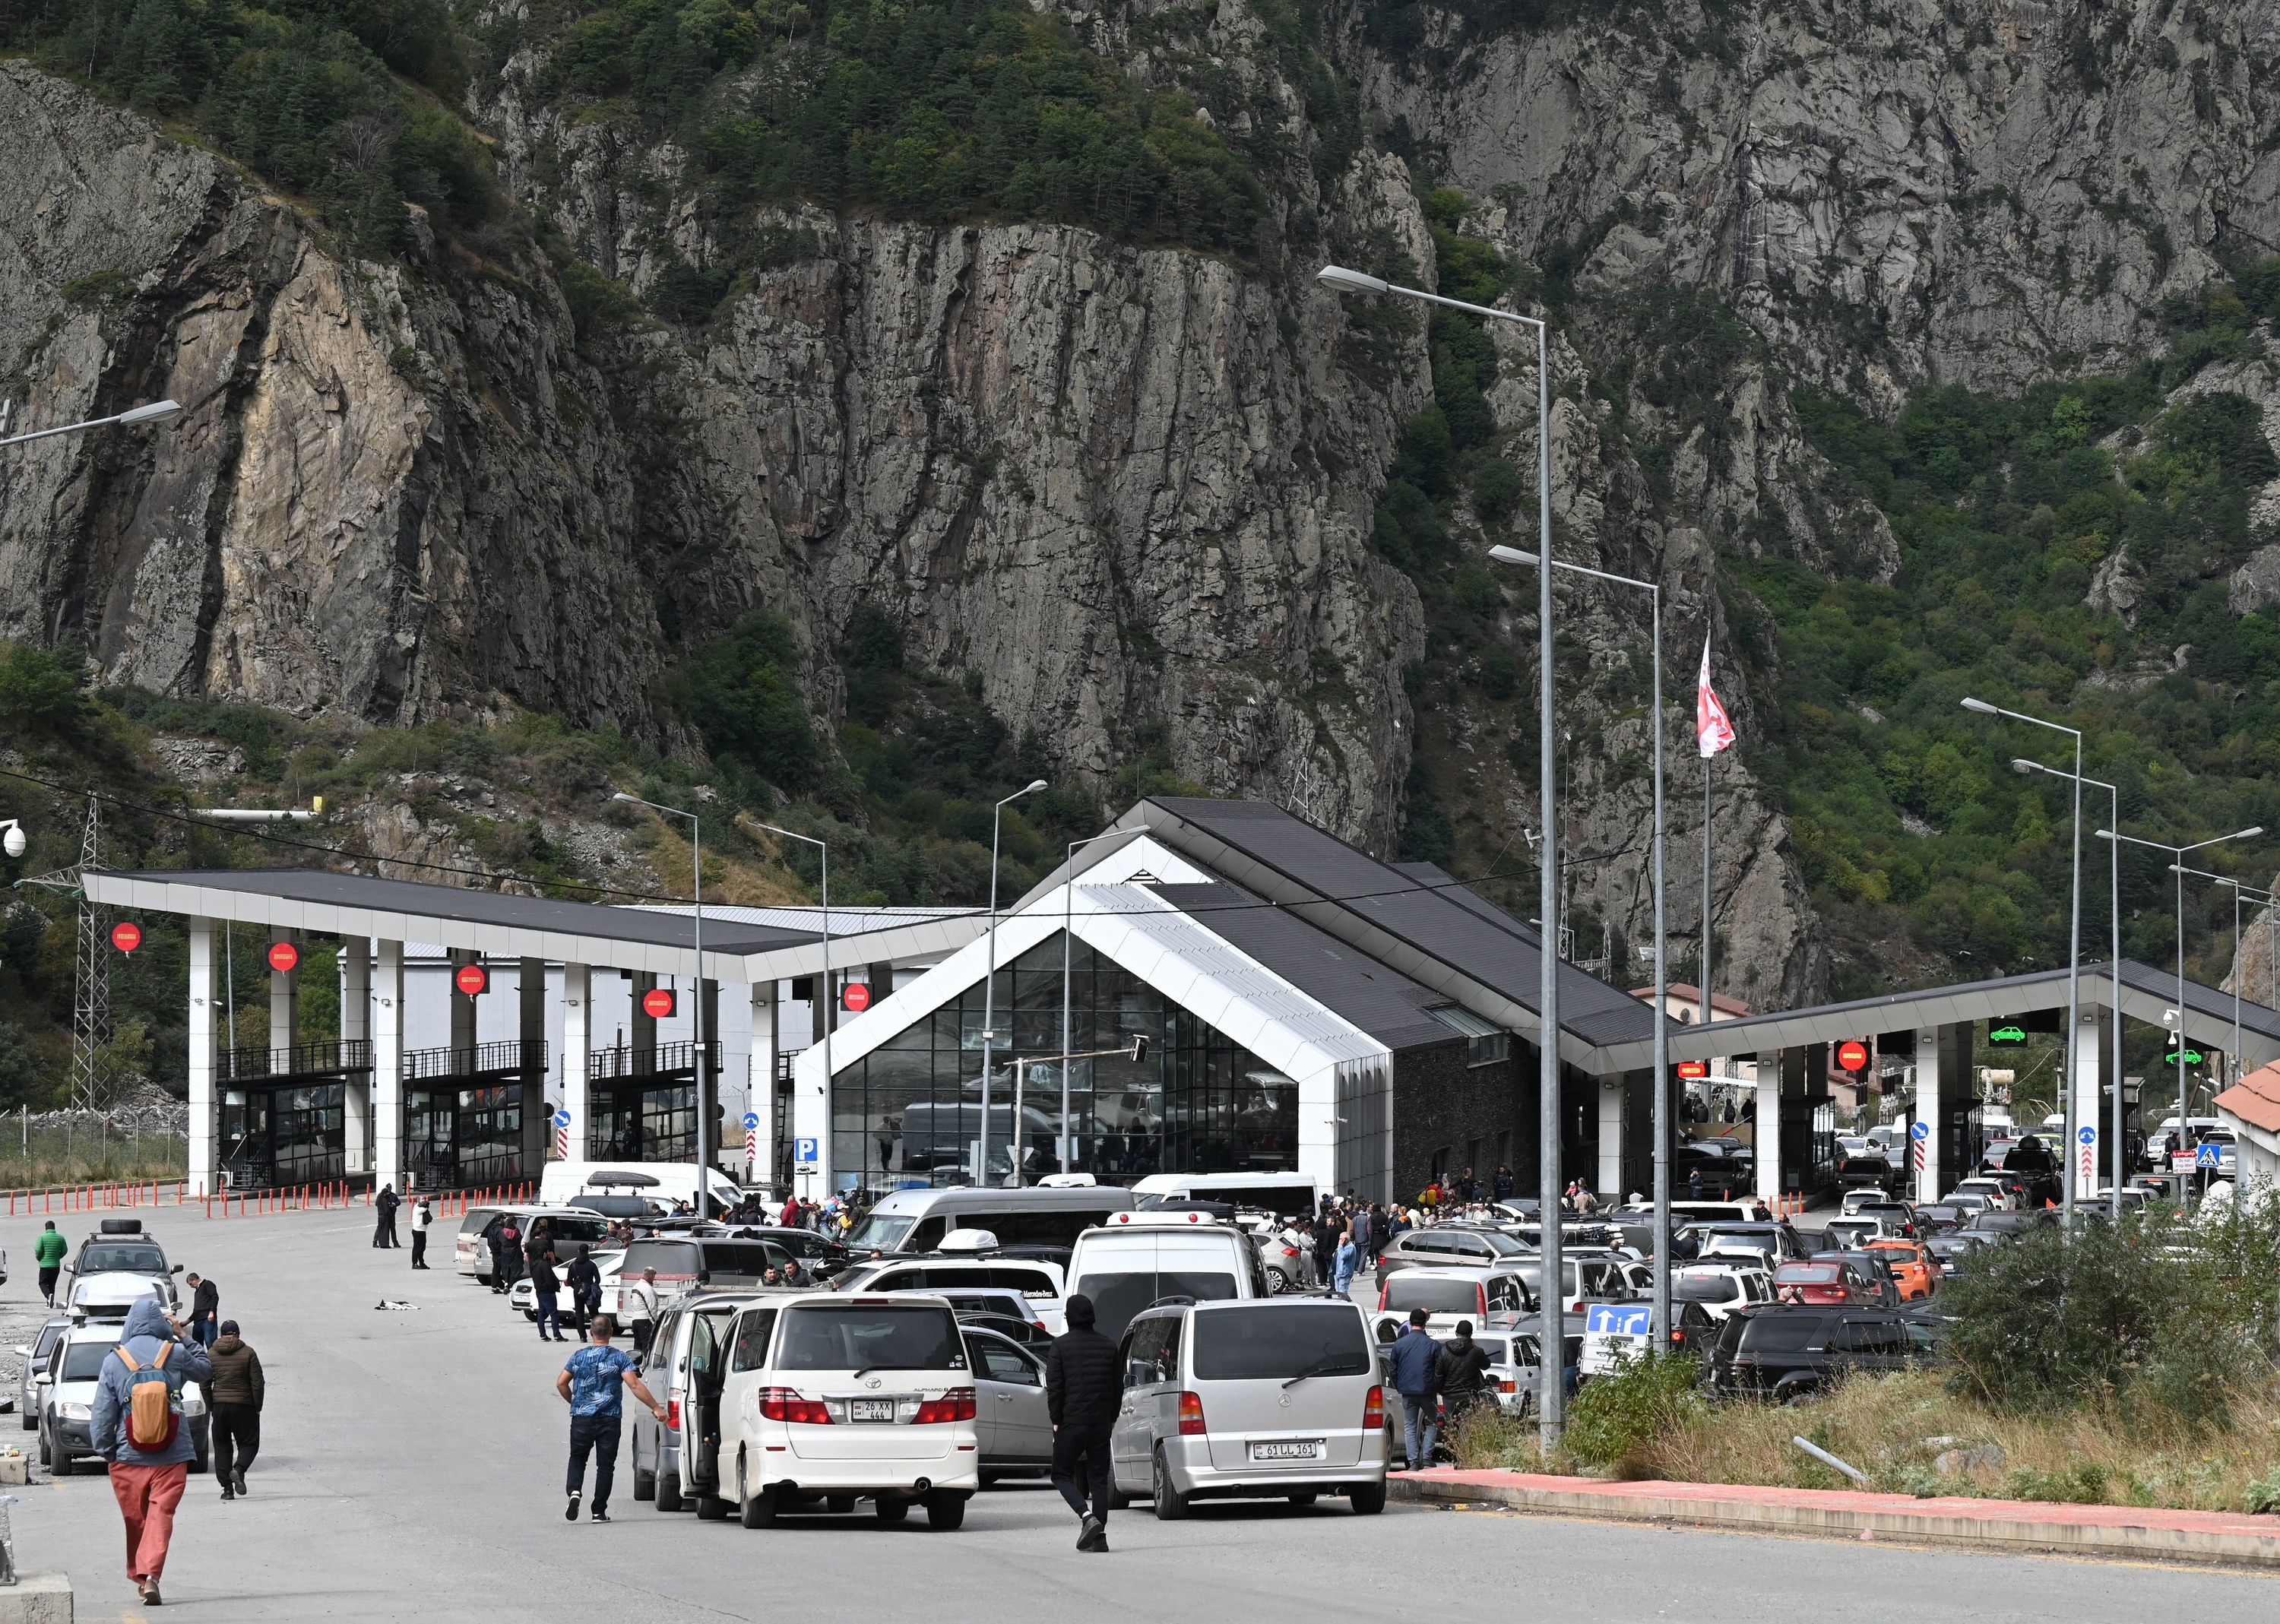 A general view of the Georgian side of the Verkhni Lars customs checkpoint crowded with a long line of cars